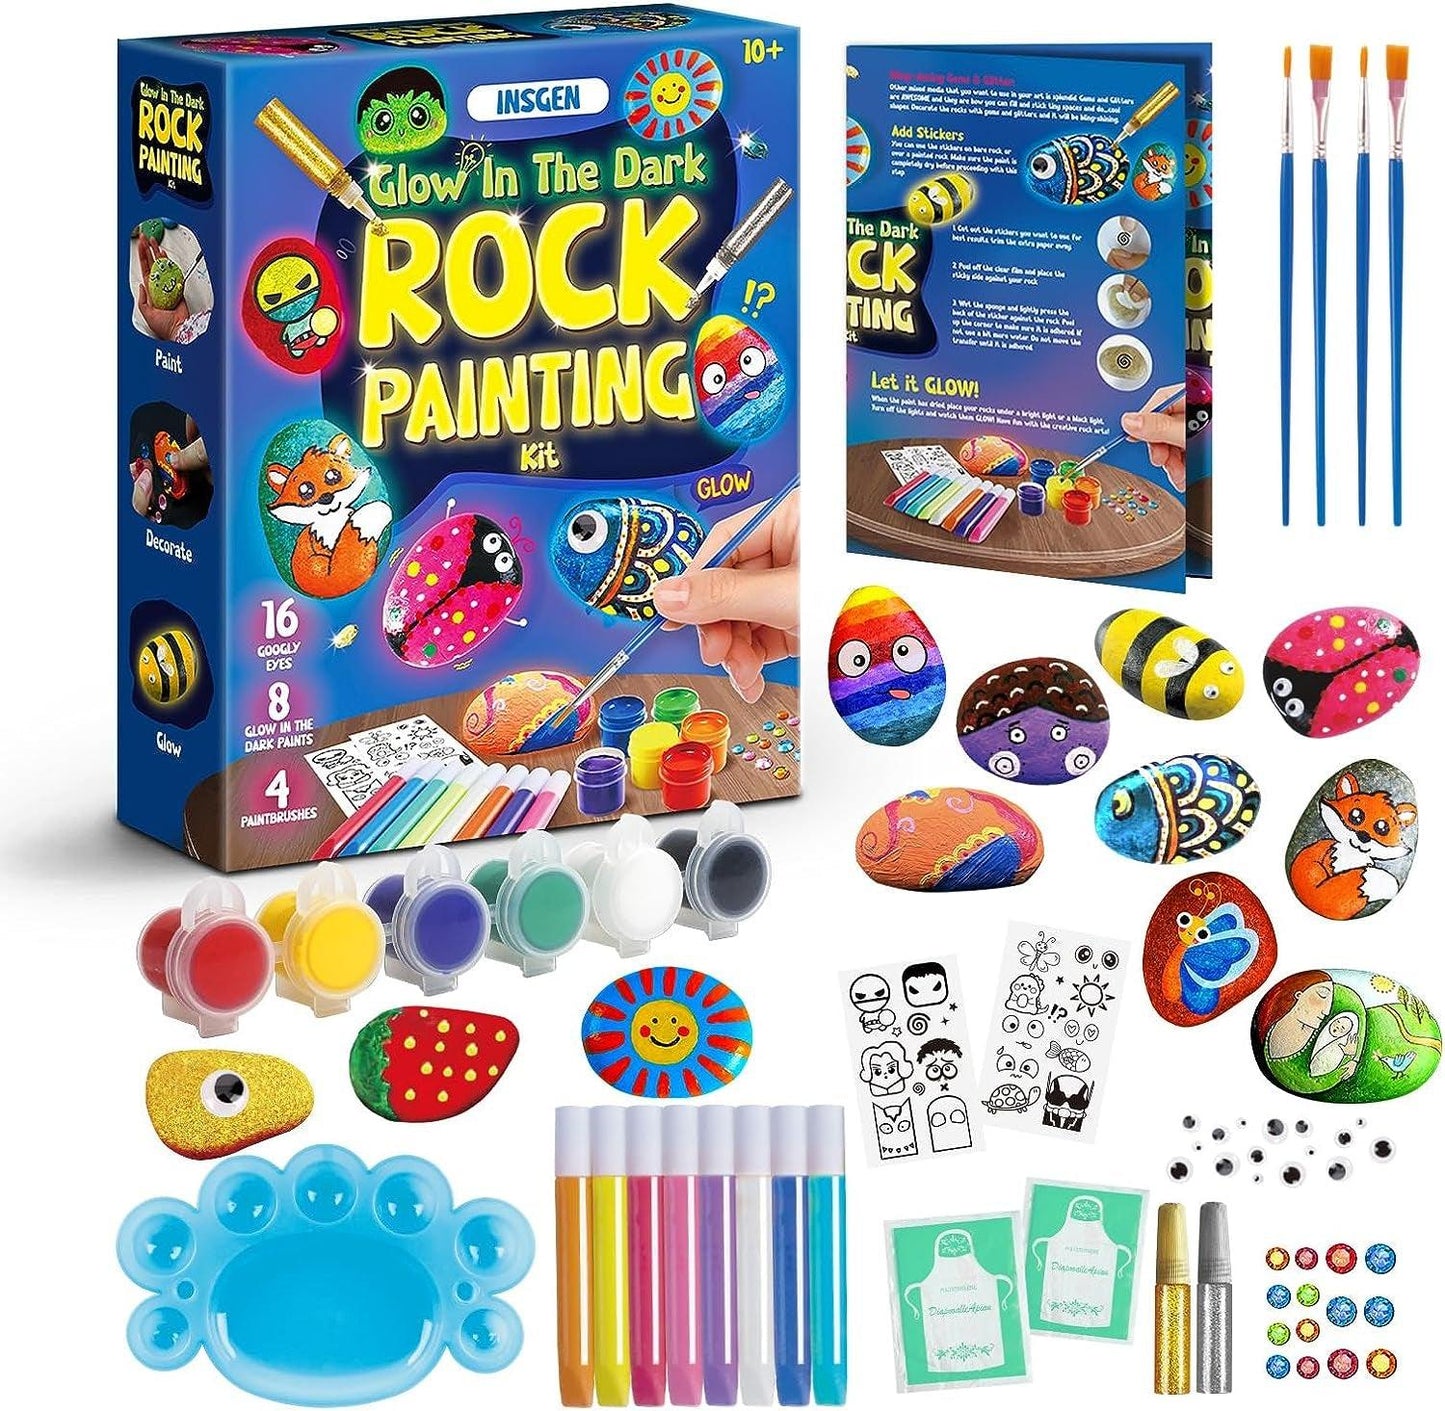  BainGesk Glow in The Dark Rock Painting Kit for Kids, Painting  Rock Crafts Set, Arts and Crafts Gifts for Ages 6-8, Creative Activities Art  Toys for 6, 7, 8, 9, 10